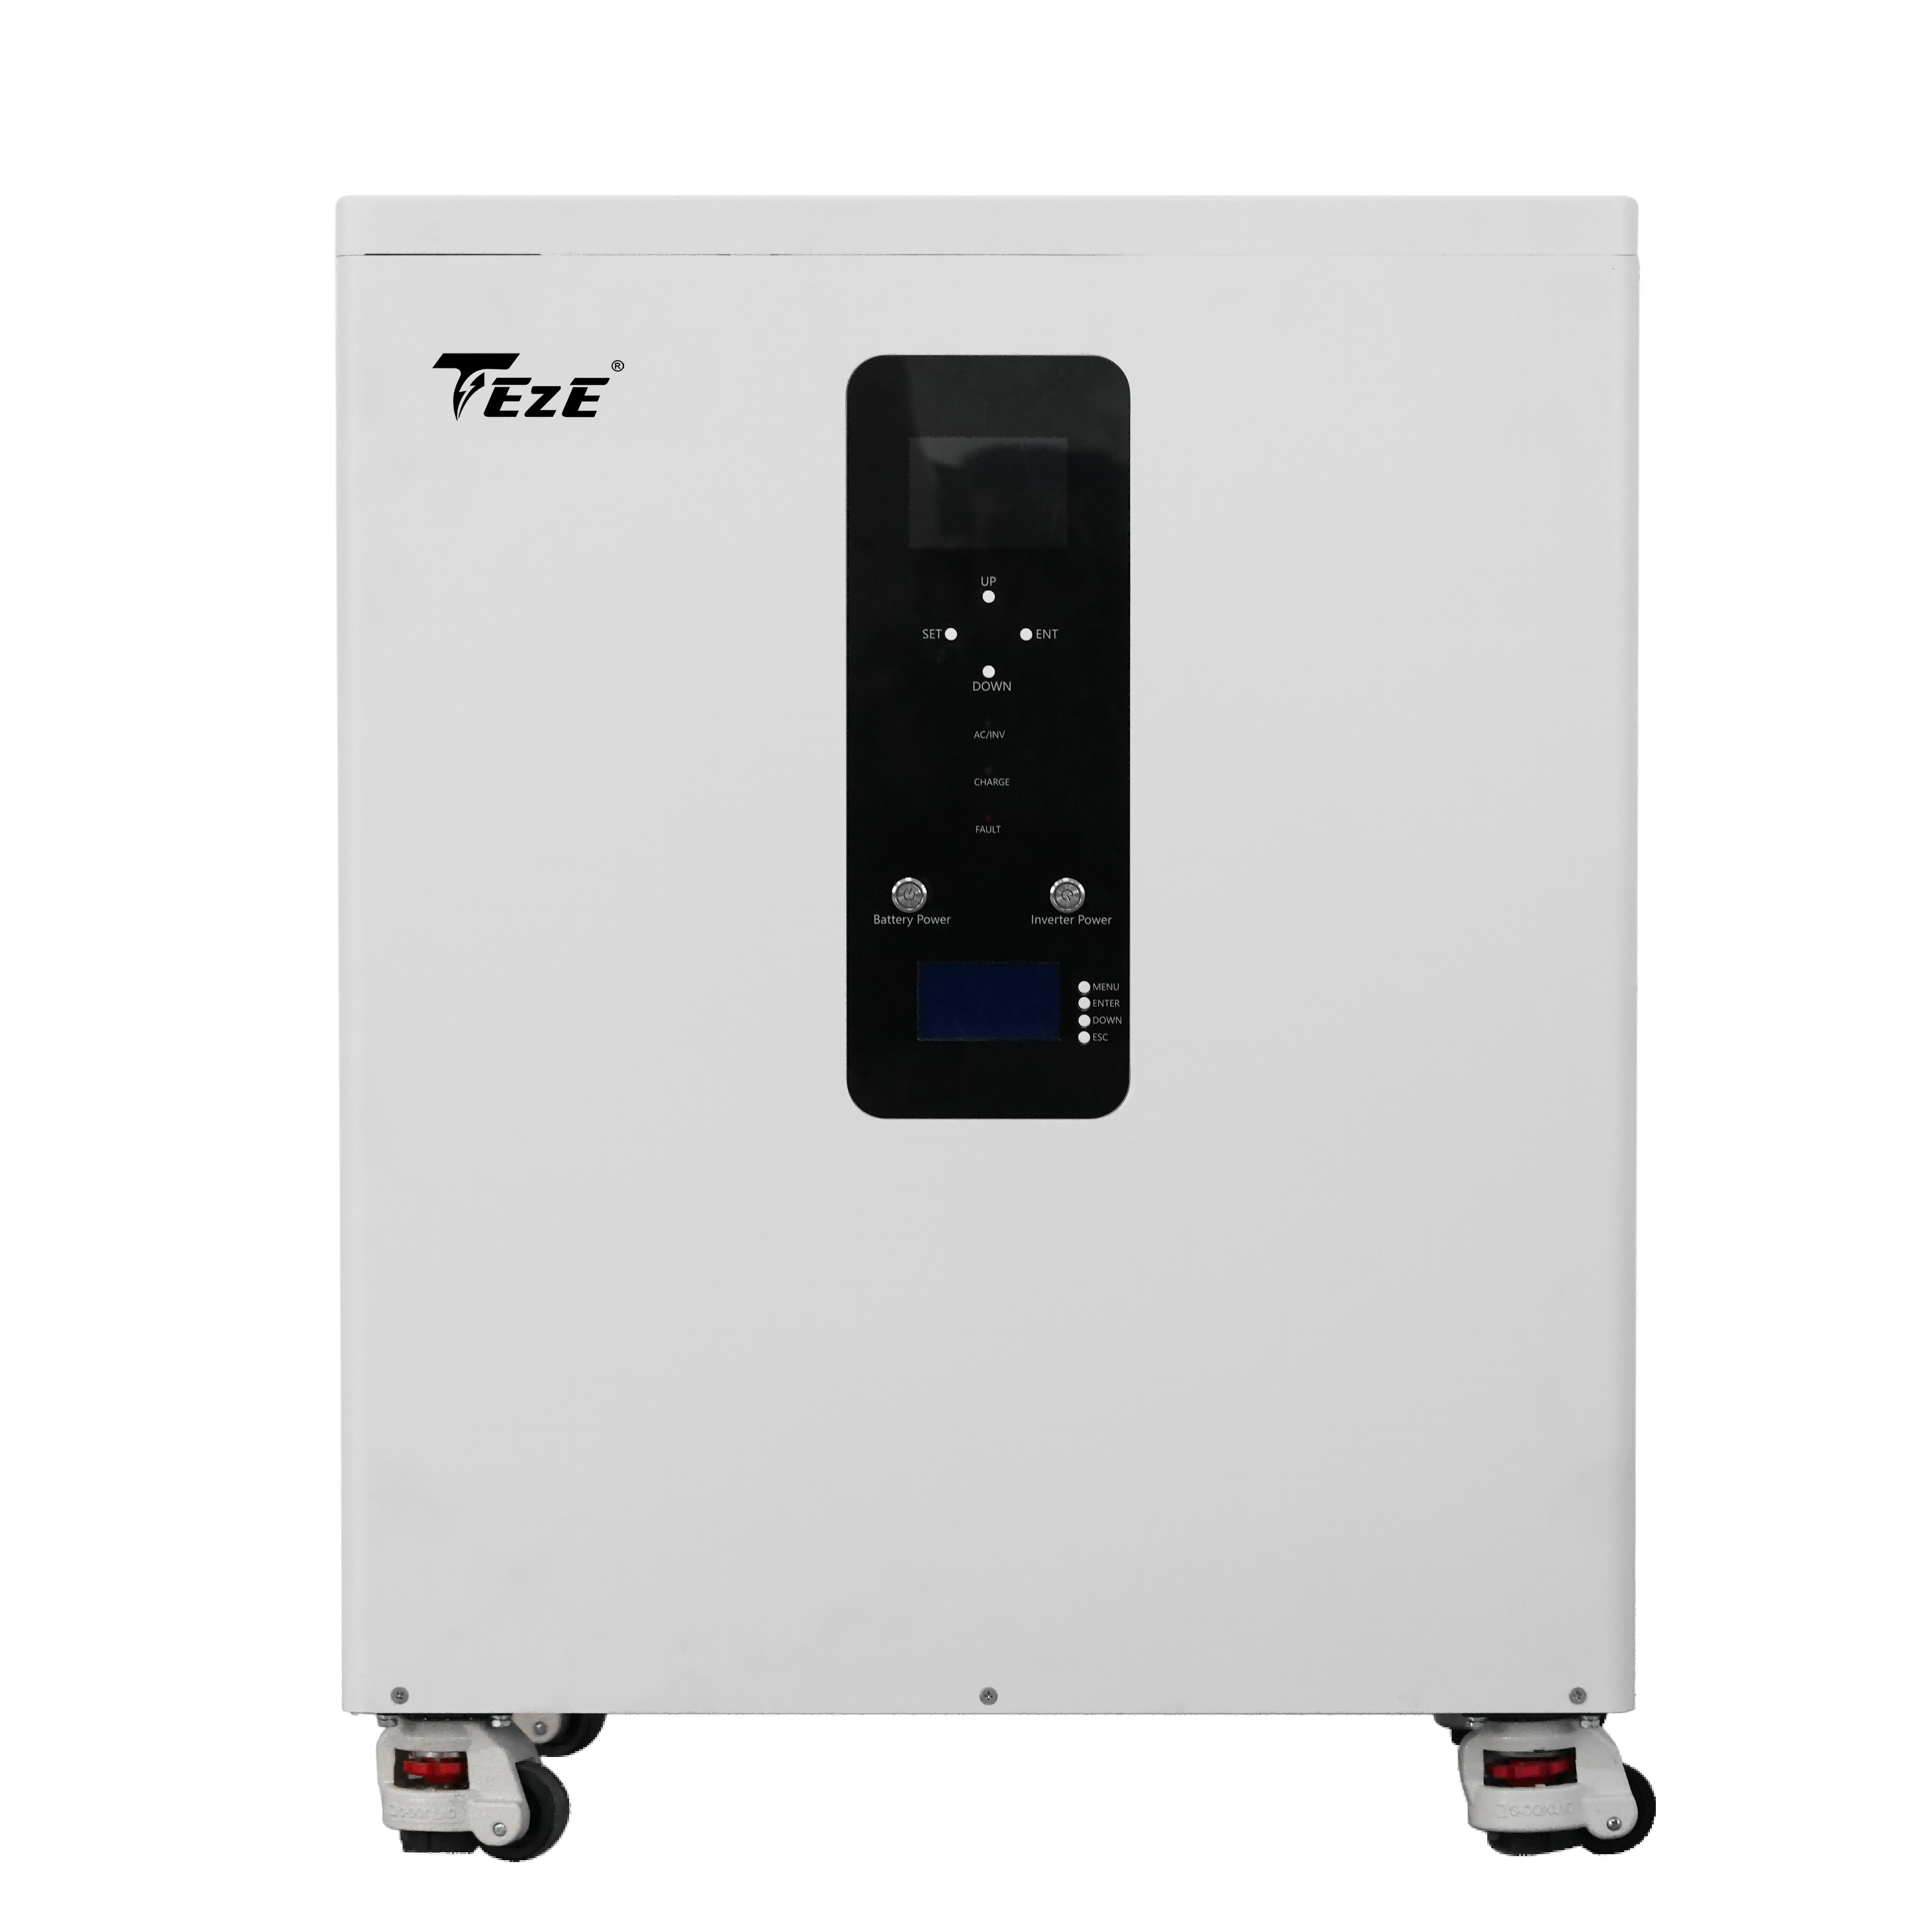 TezePower 51.2V 400Ah All in One 20kWh LiFePO4 Battery Mobile ESS with Active Balancer, Built-in BMS, MPPT, 10kw Hybrid Inverter